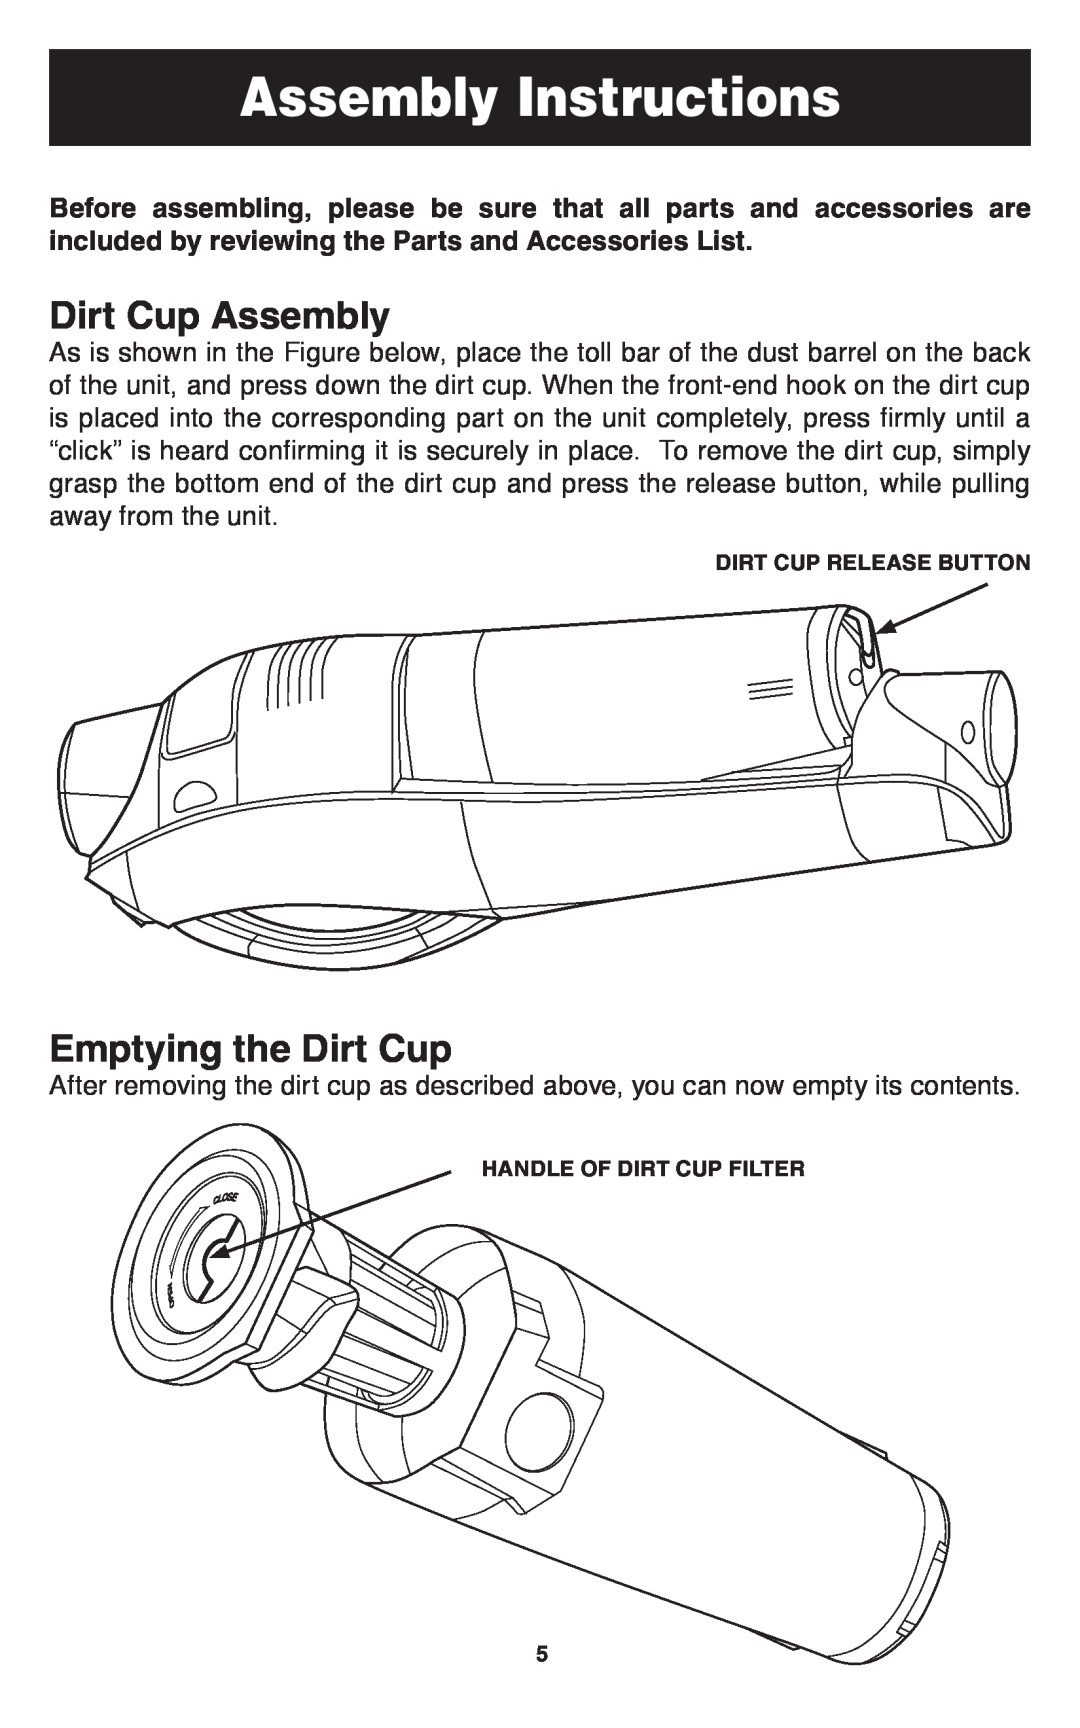 Oreck TEK 100 important safety instructions Assembly Instructions, Dirt Cup Assembly, Emptying the Dirt Cup 